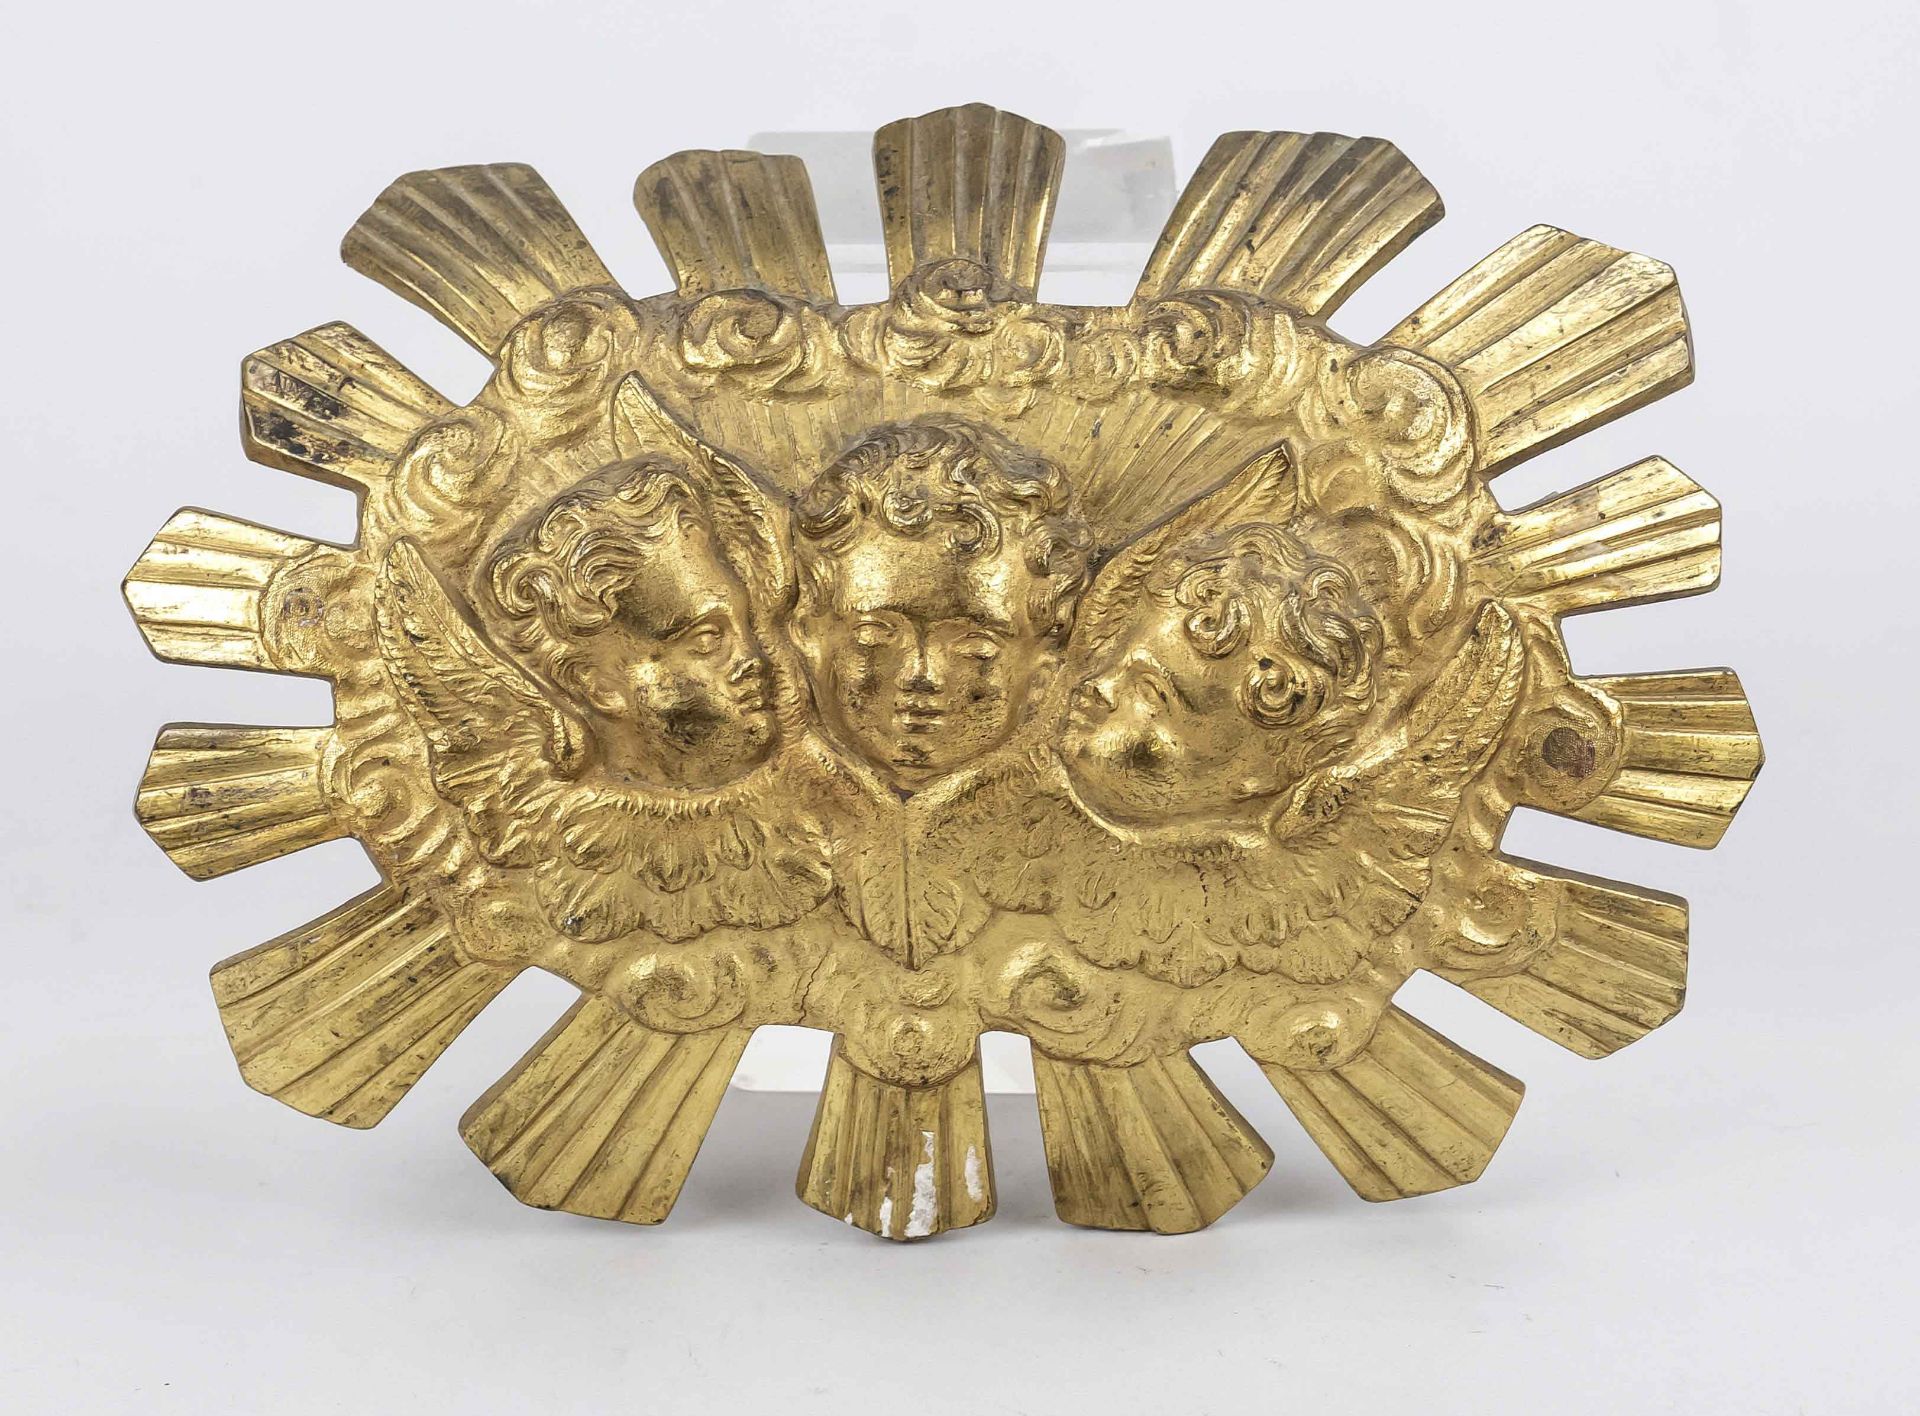 Decorative mount/application, late 19th century, brass with residual gilding. 3 cherubs in woolen